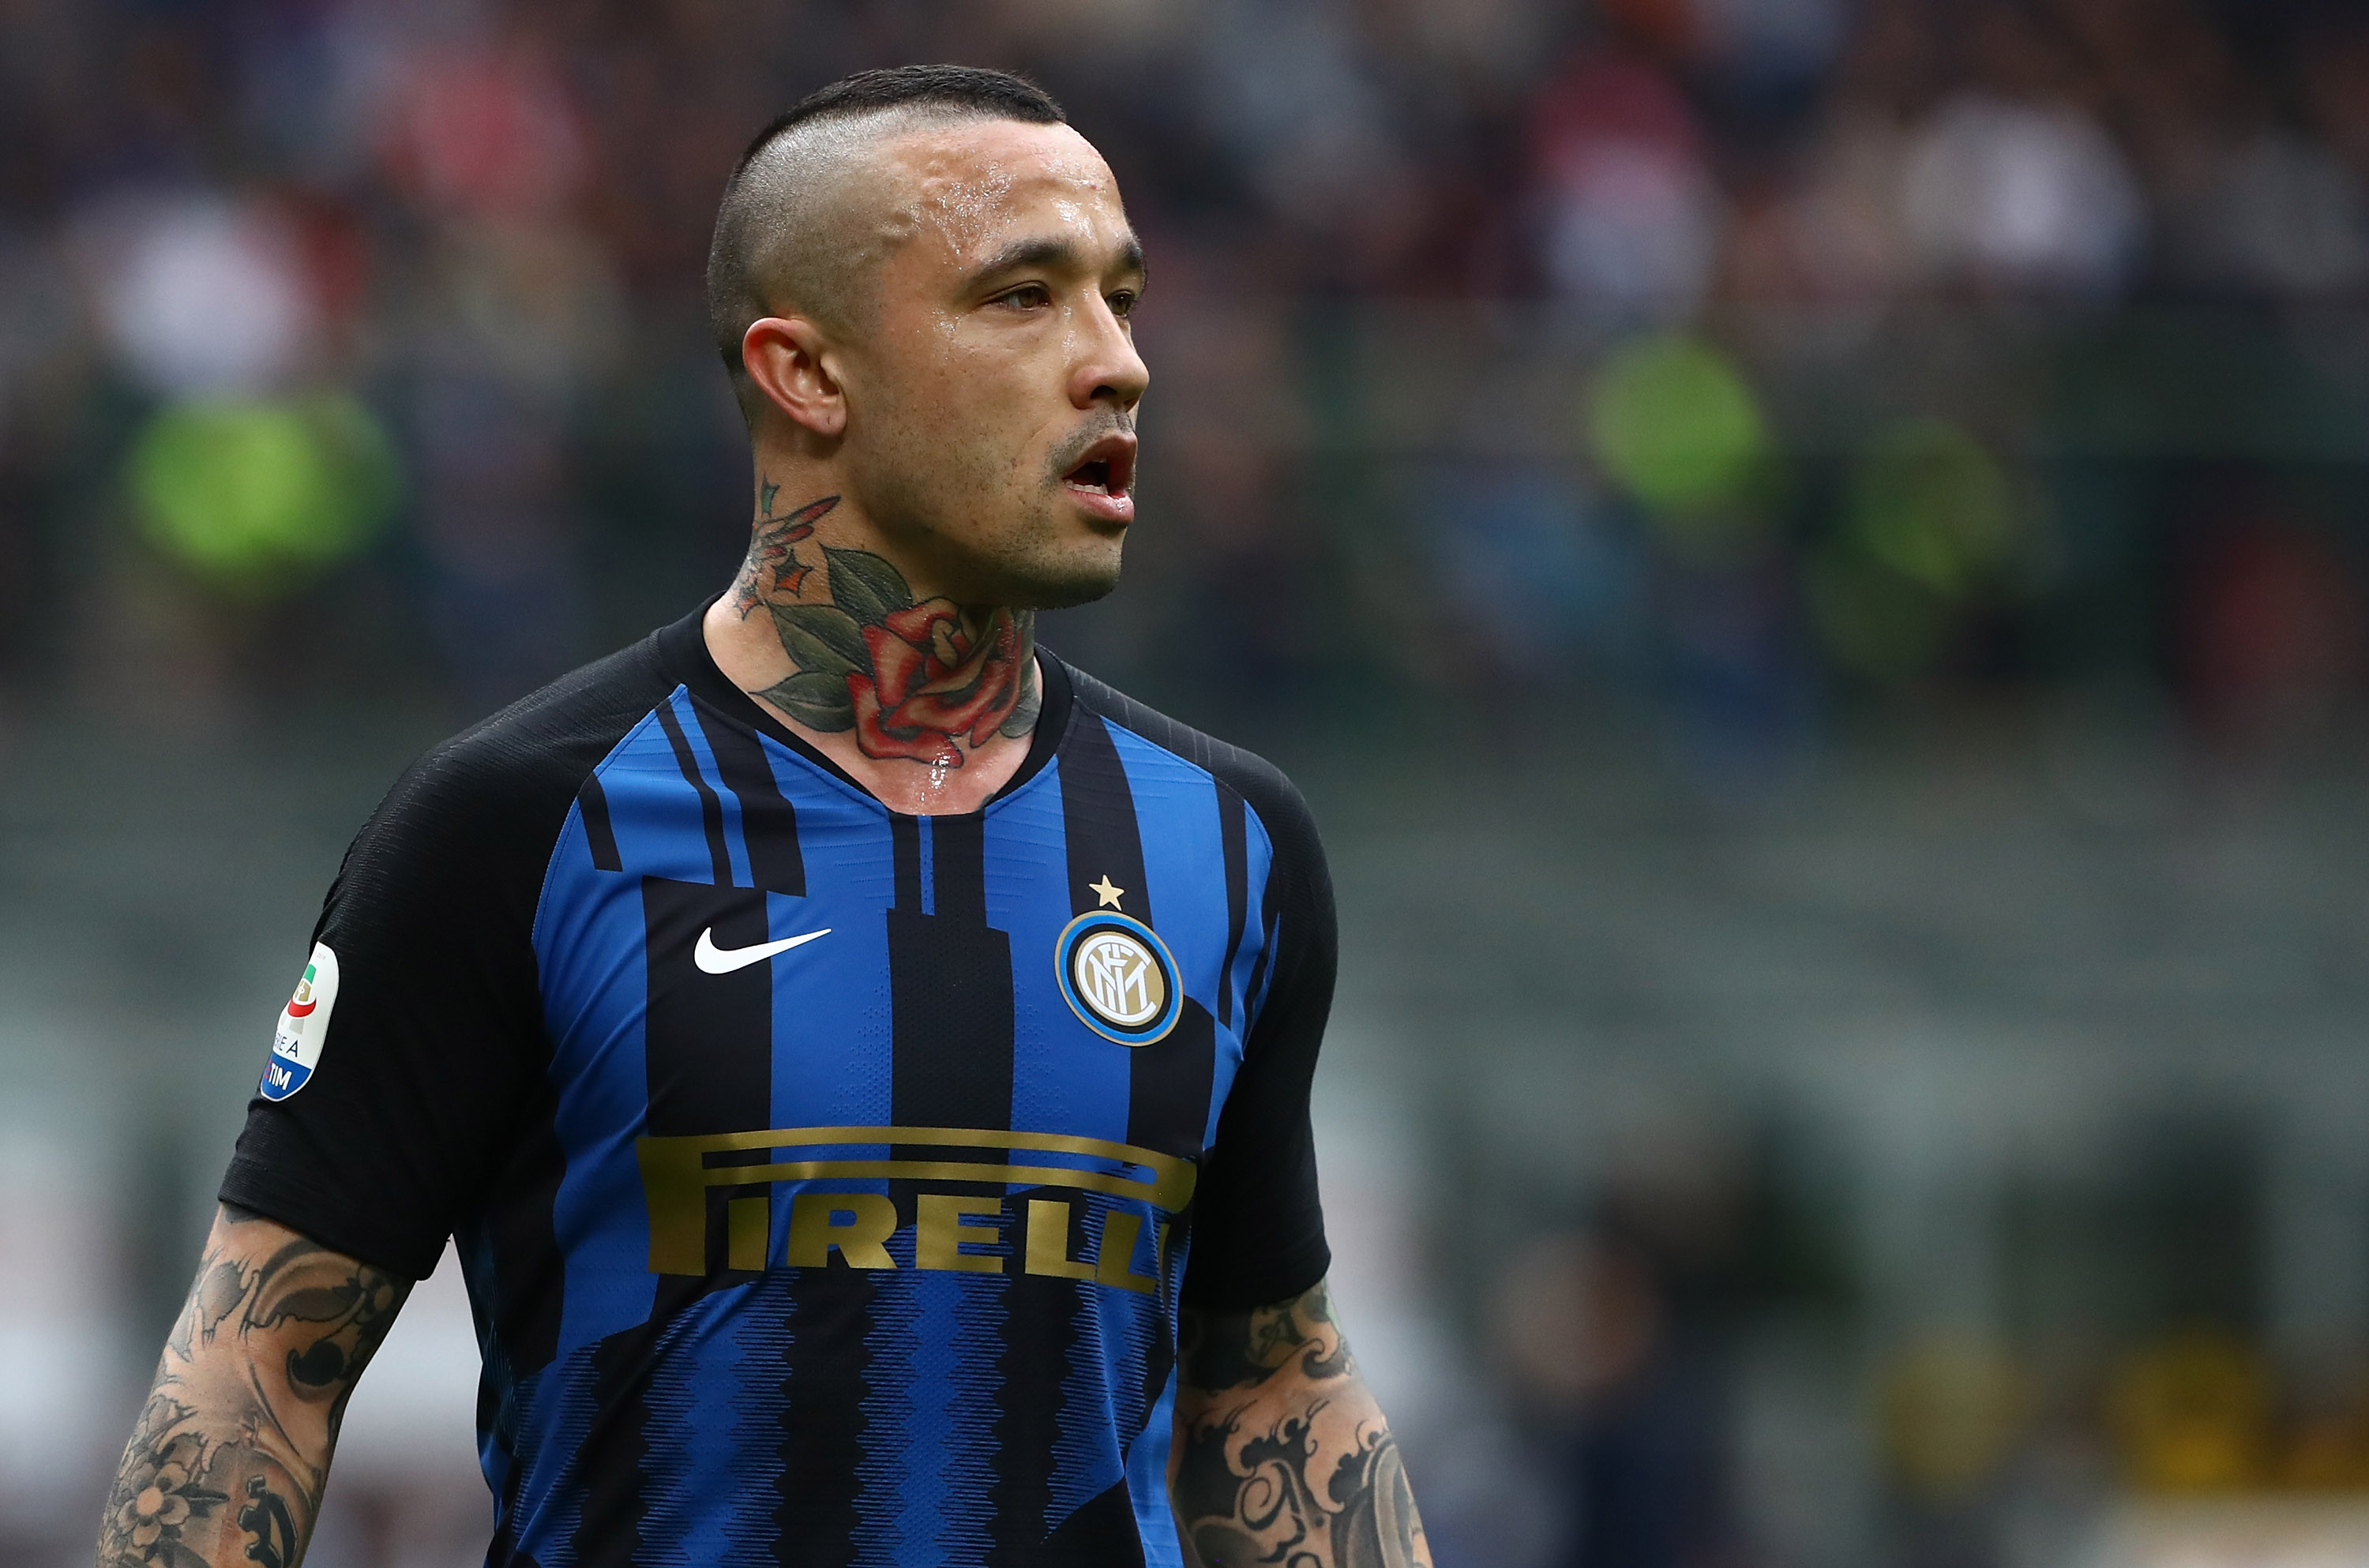 MILAN, ITALY - APRIL 07:  Radja Nainggolan of FC Internazionale looks on during the Serie A match between FC Internazionale and Atalanta BC at Stadio Giuseppe Meazza on April 7, 2019 in Milan, Italy.  (Photo by Marco Luzzani - Inter/Inter via Getty Images)